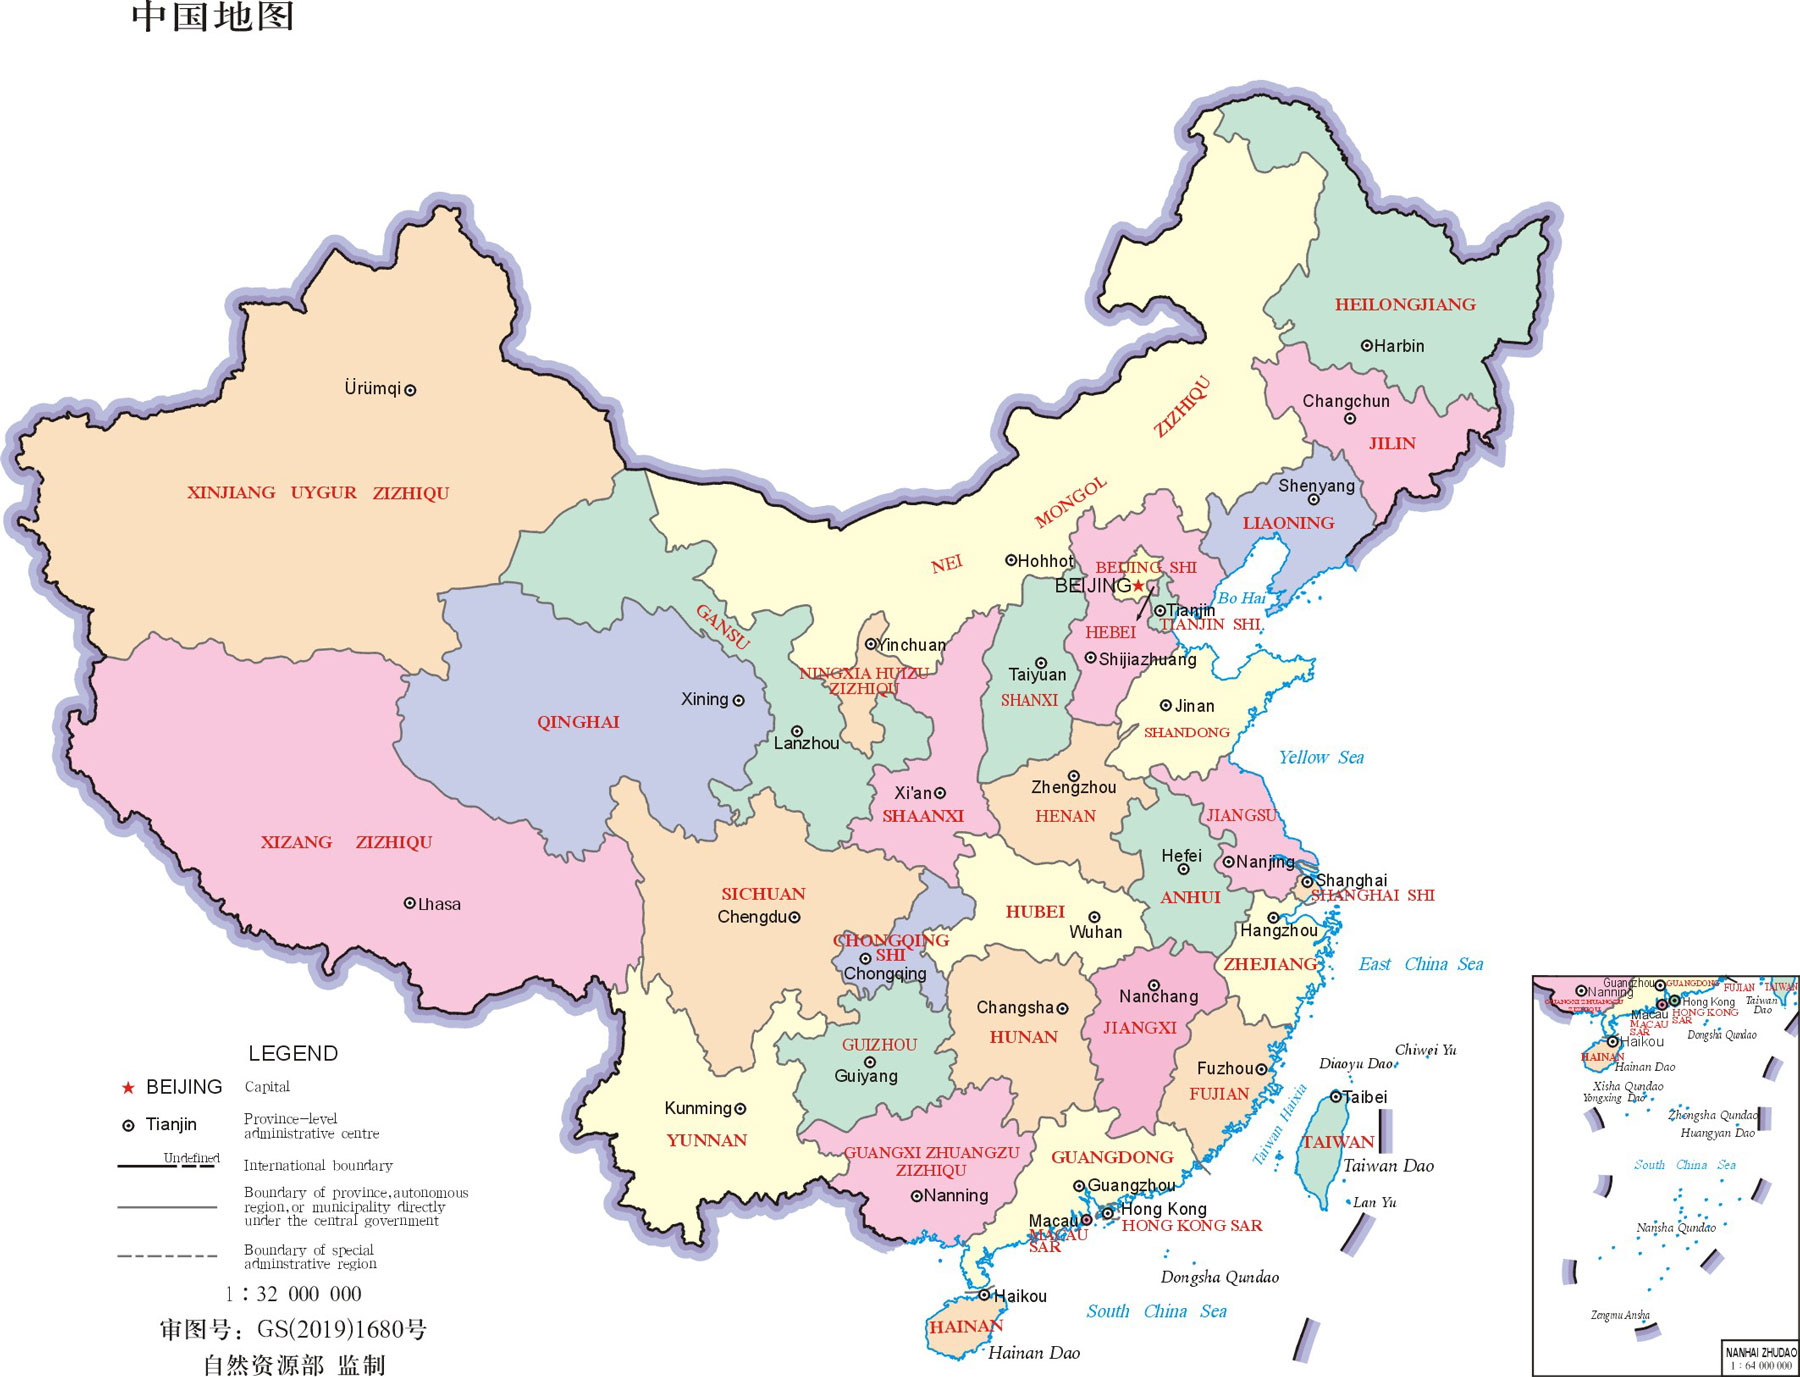 Show Me The Map Of China China Provincial Map, Map of China Provinces, China Maps 2020